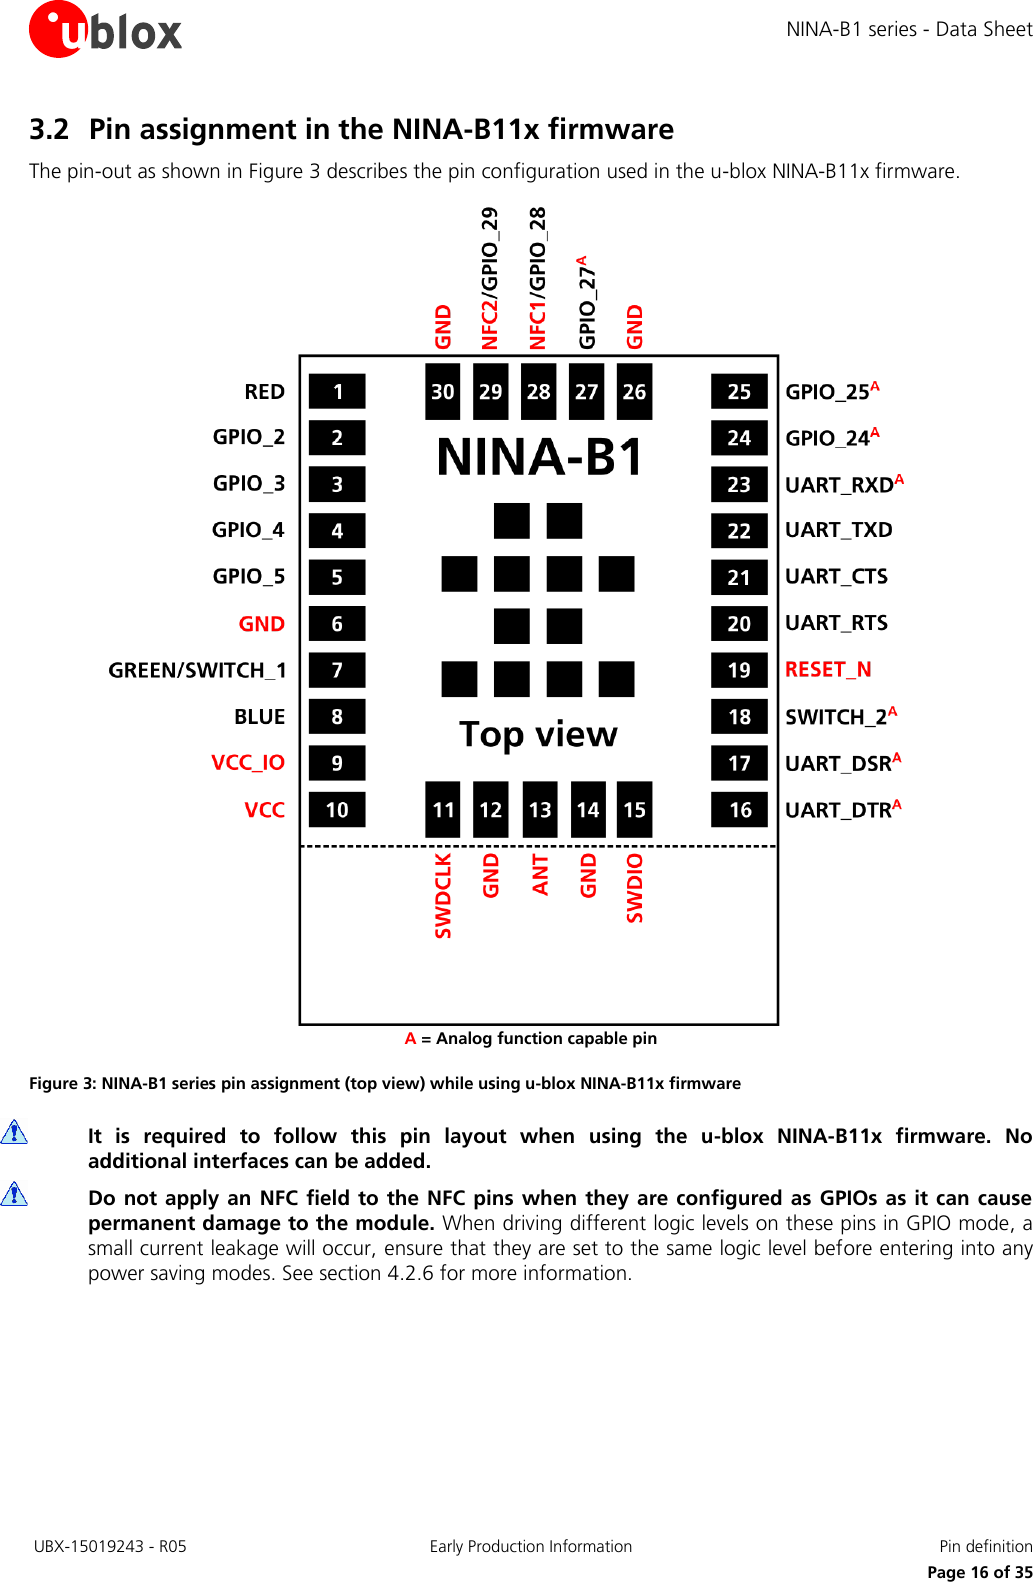 NINA-B1 series - Data Sheet  UBX-15019243 - R05 Early Production Information  Pin definition     Page 16 of 35 3.2 Pin assignment in the NINA-B11x firmware The pin-out as shown in Figure 3 describes the pin configuration used in the u-blox NINA-B11x firmware.                     A = Analog function capable pin Figure 3: NINA-B1 series pin assignment (top view) while using u-blox NINA-B11x firmware  It  is  required  to  follow  this  pin  layout  when  using  the  u-blox  NINA-B11x  firmware.  No additional interfaces can be added.  Do not apply  an  NFC field to  the NFC pins  when  they are configured as  GPIOs as it can cause permanent damage to the module. When driving different logic levels on these pins in GPIO mode, a small current leakage will occur, ensure that they are set to the same logic level before entering into any power saving modes. See section 4.2.6 for more information.  